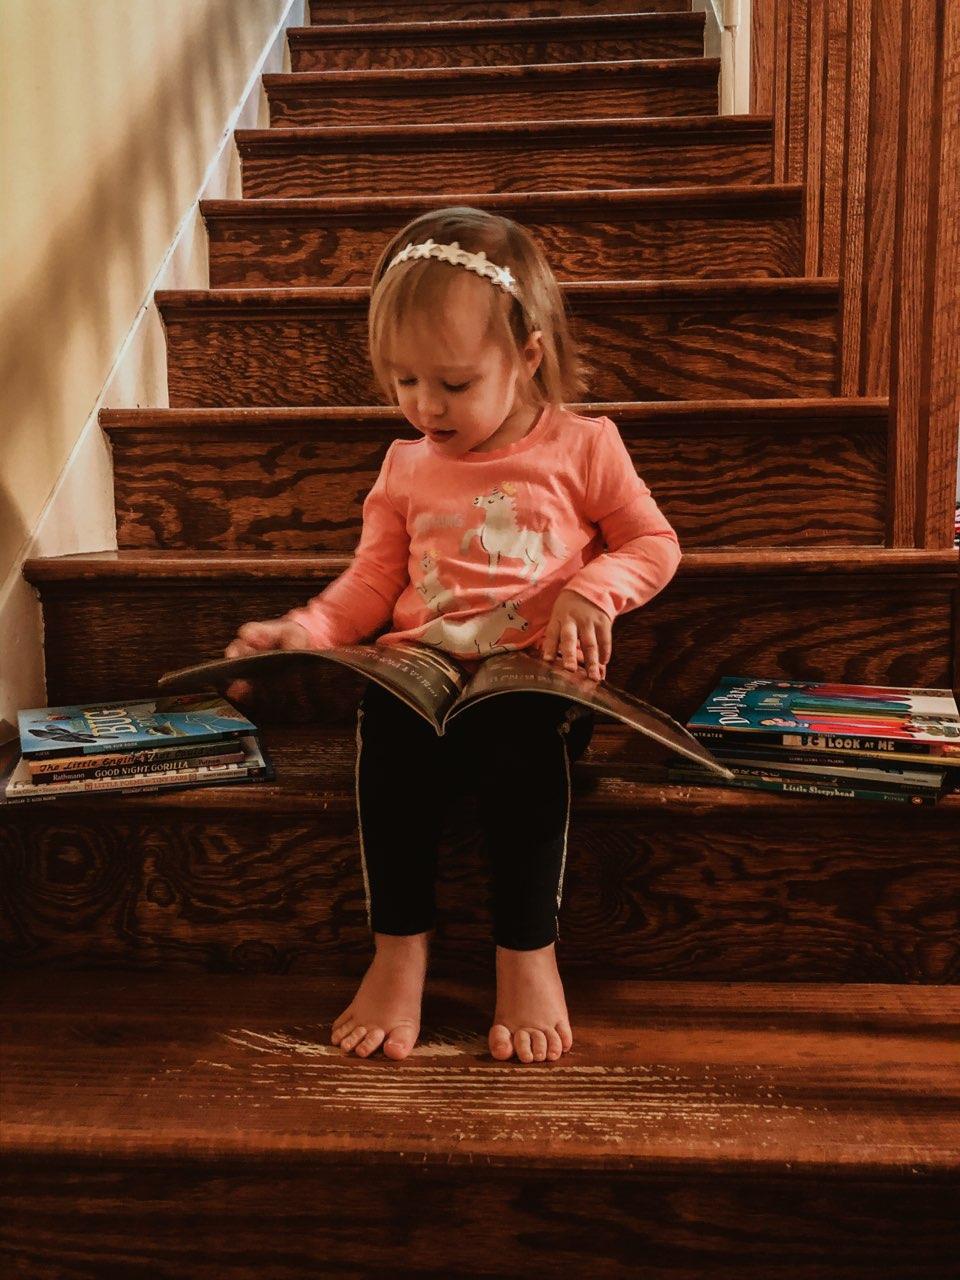 student reading a book on stairs